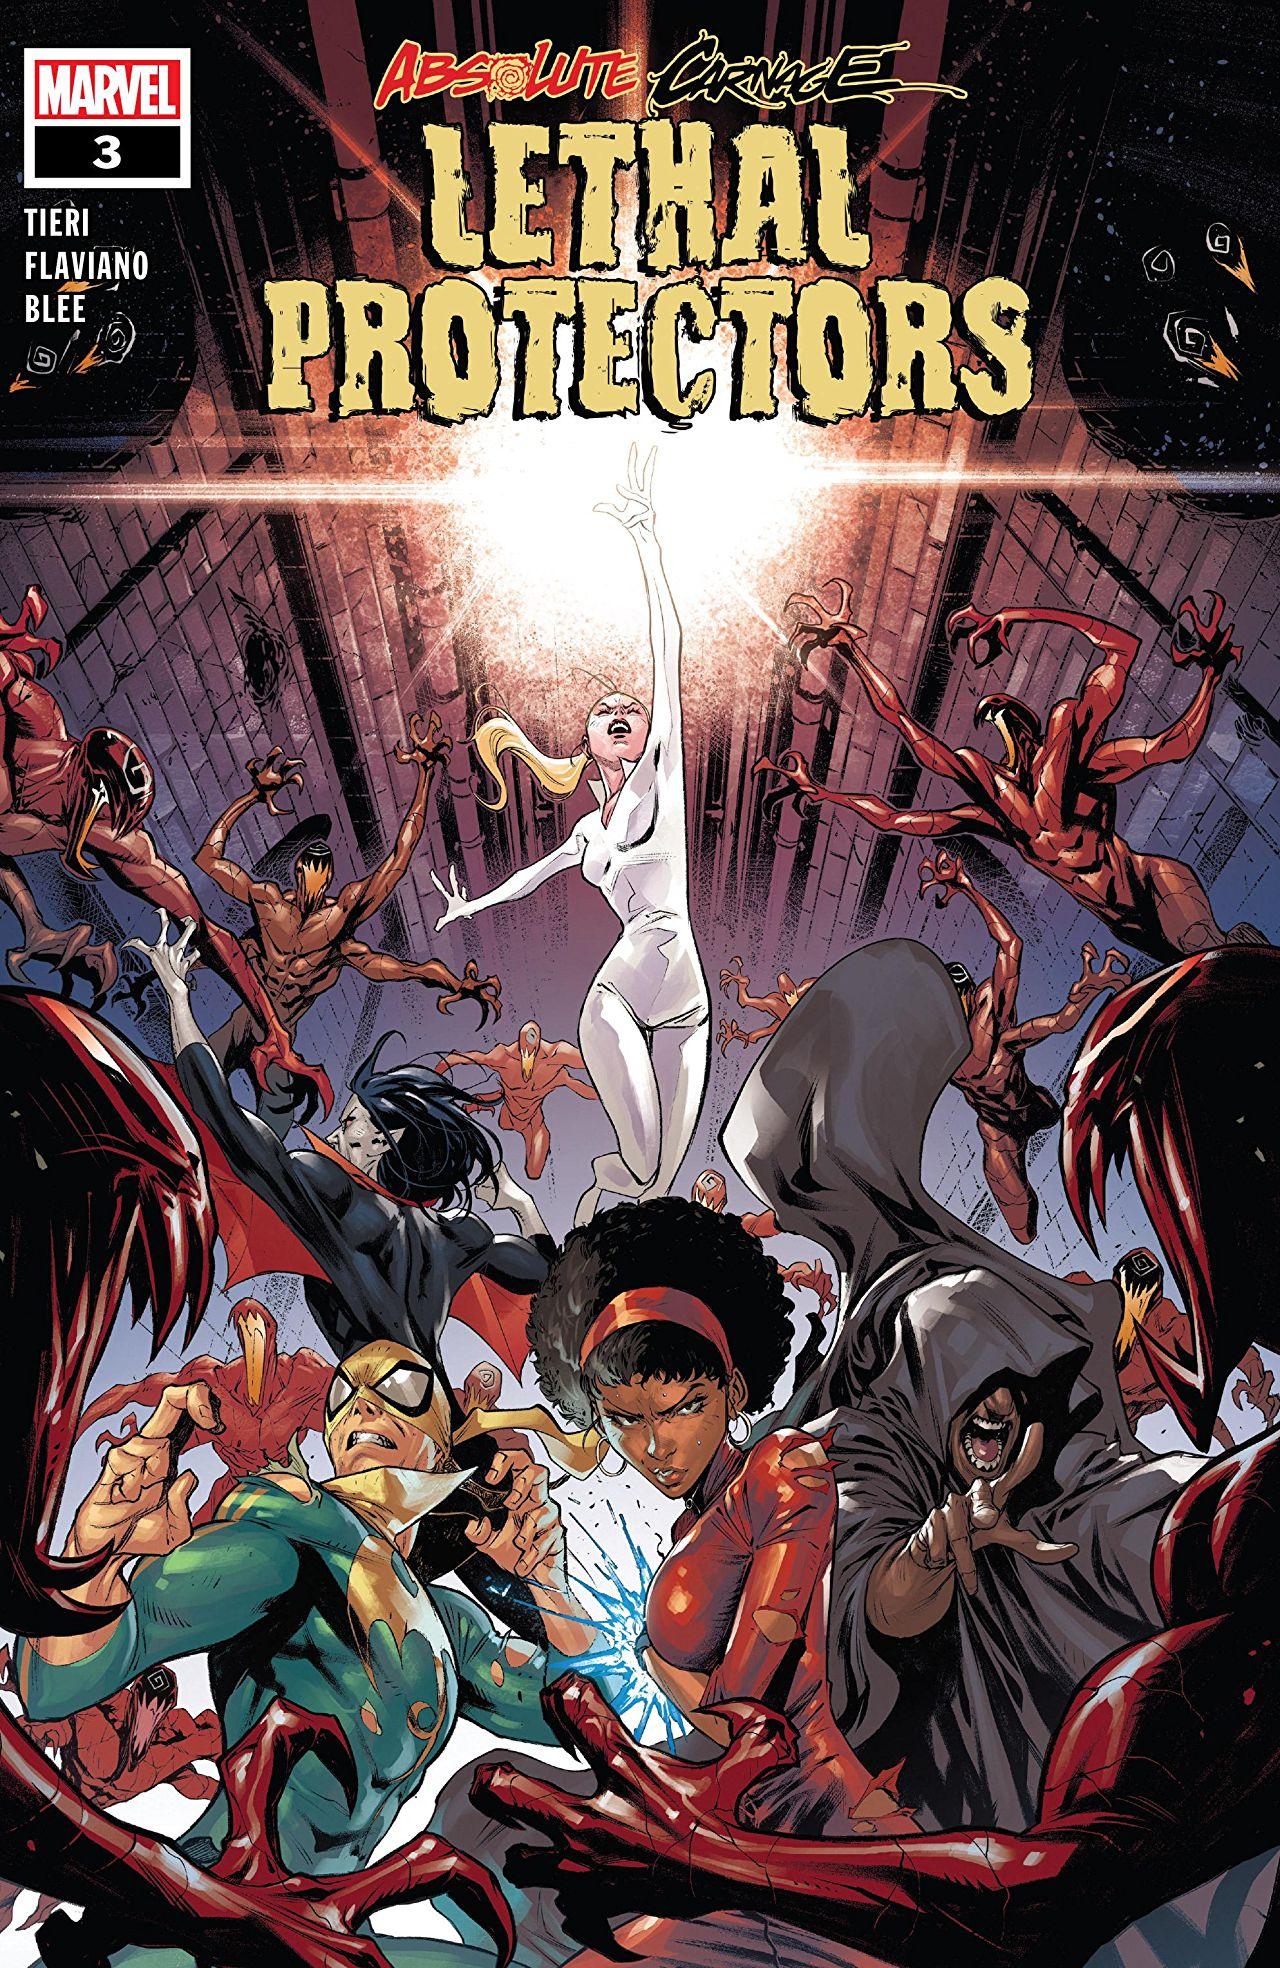 Absolute Carnage: Lethal Protectors Vol. 1 #3